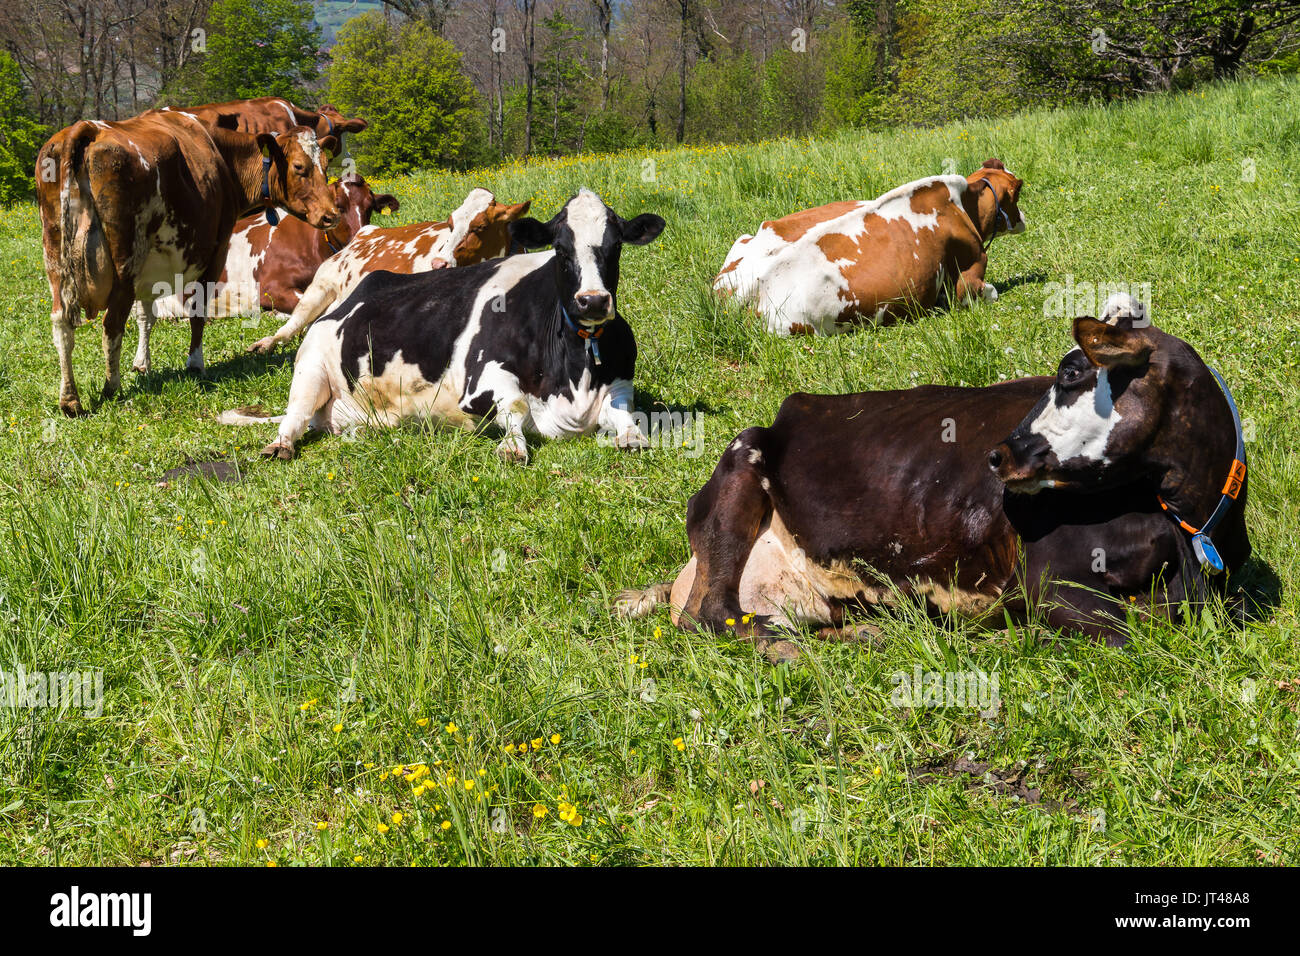 Cows resting and socializing in the countryside, Switzerland. Stock Photo